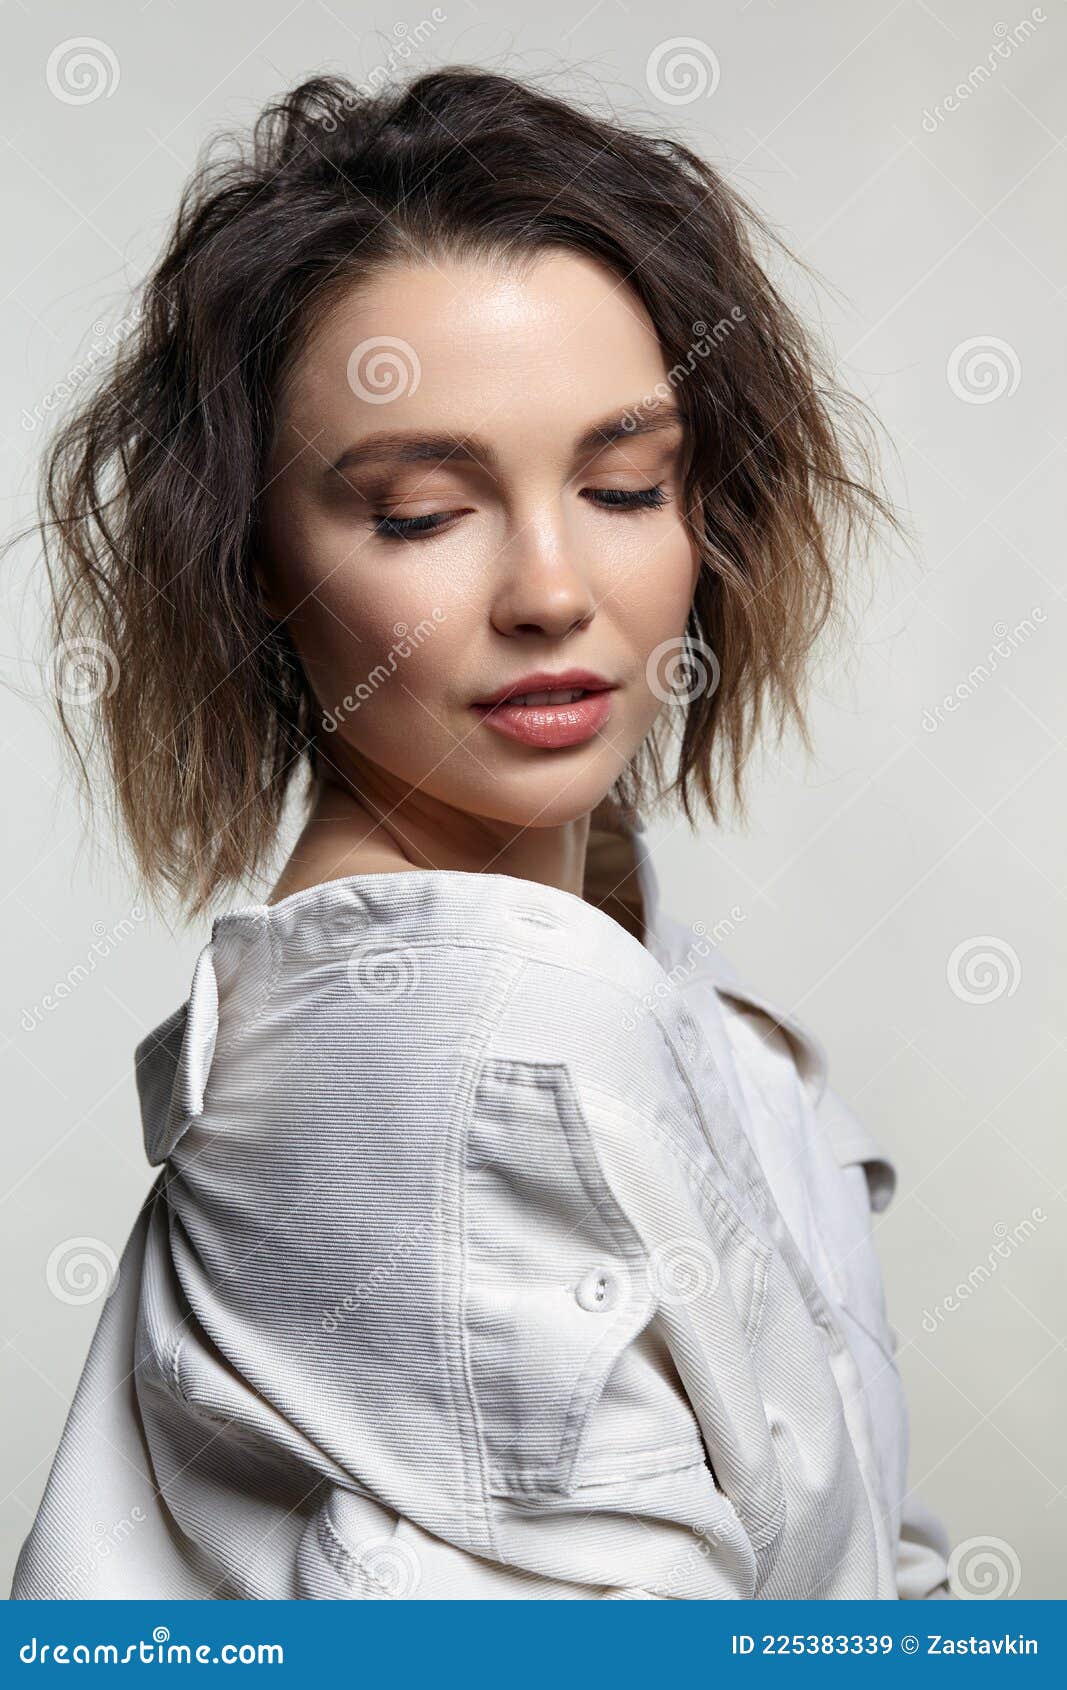 portrait of young woman with downcast eyes. female posing in milky white corduroy shirt